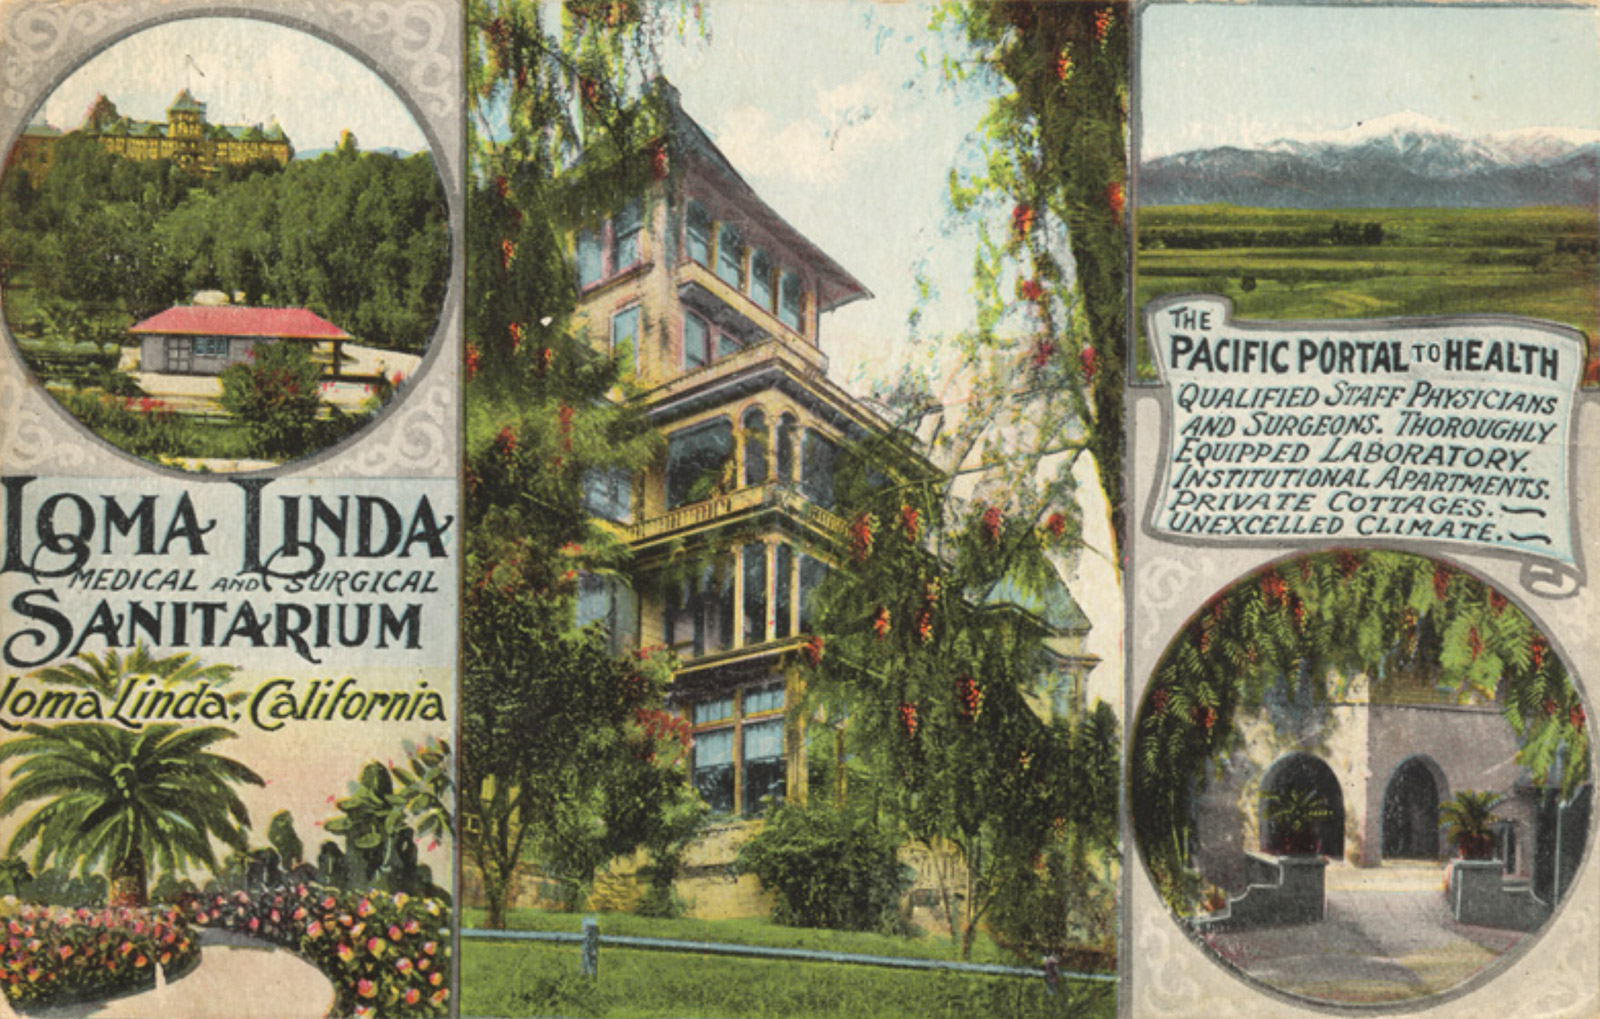 Postcard from 1913 featuring images of the  Loma Linda Sanitarium in California. Founded in 1905,  the sanatorium later became Loma Linda University.